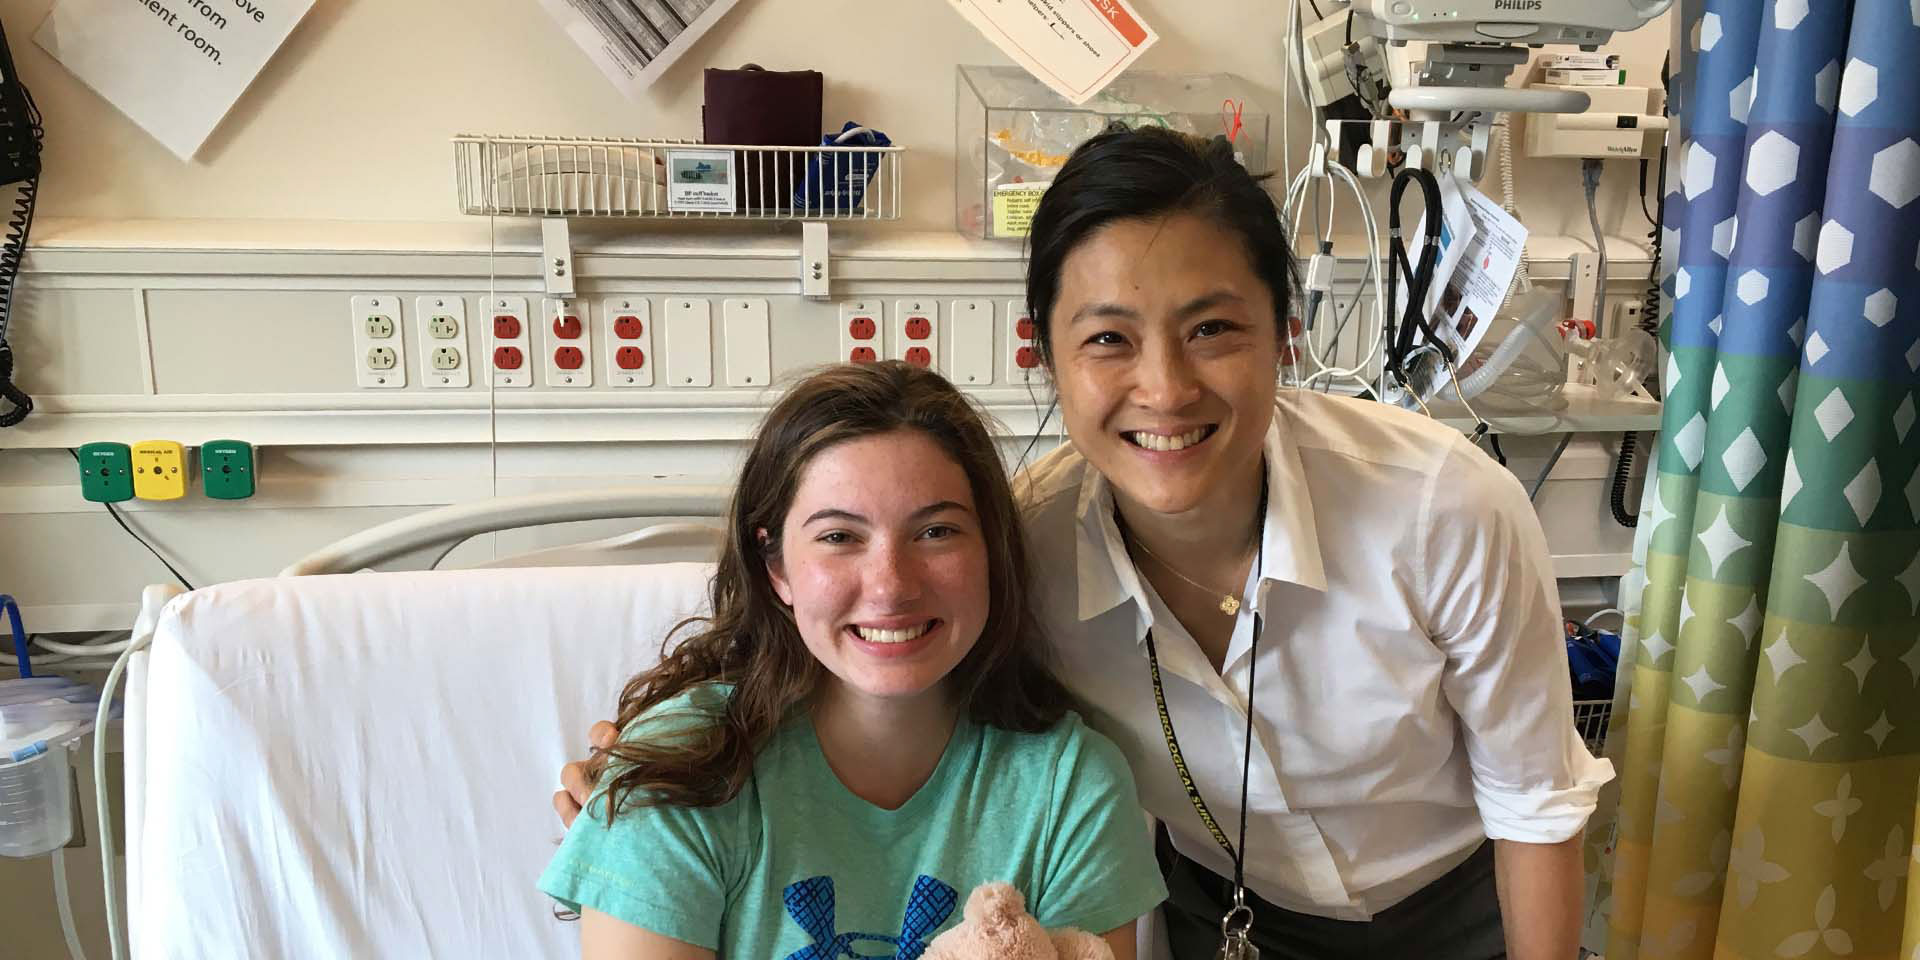 Seattle Children's Brain Tumor Program patient and physician smiling